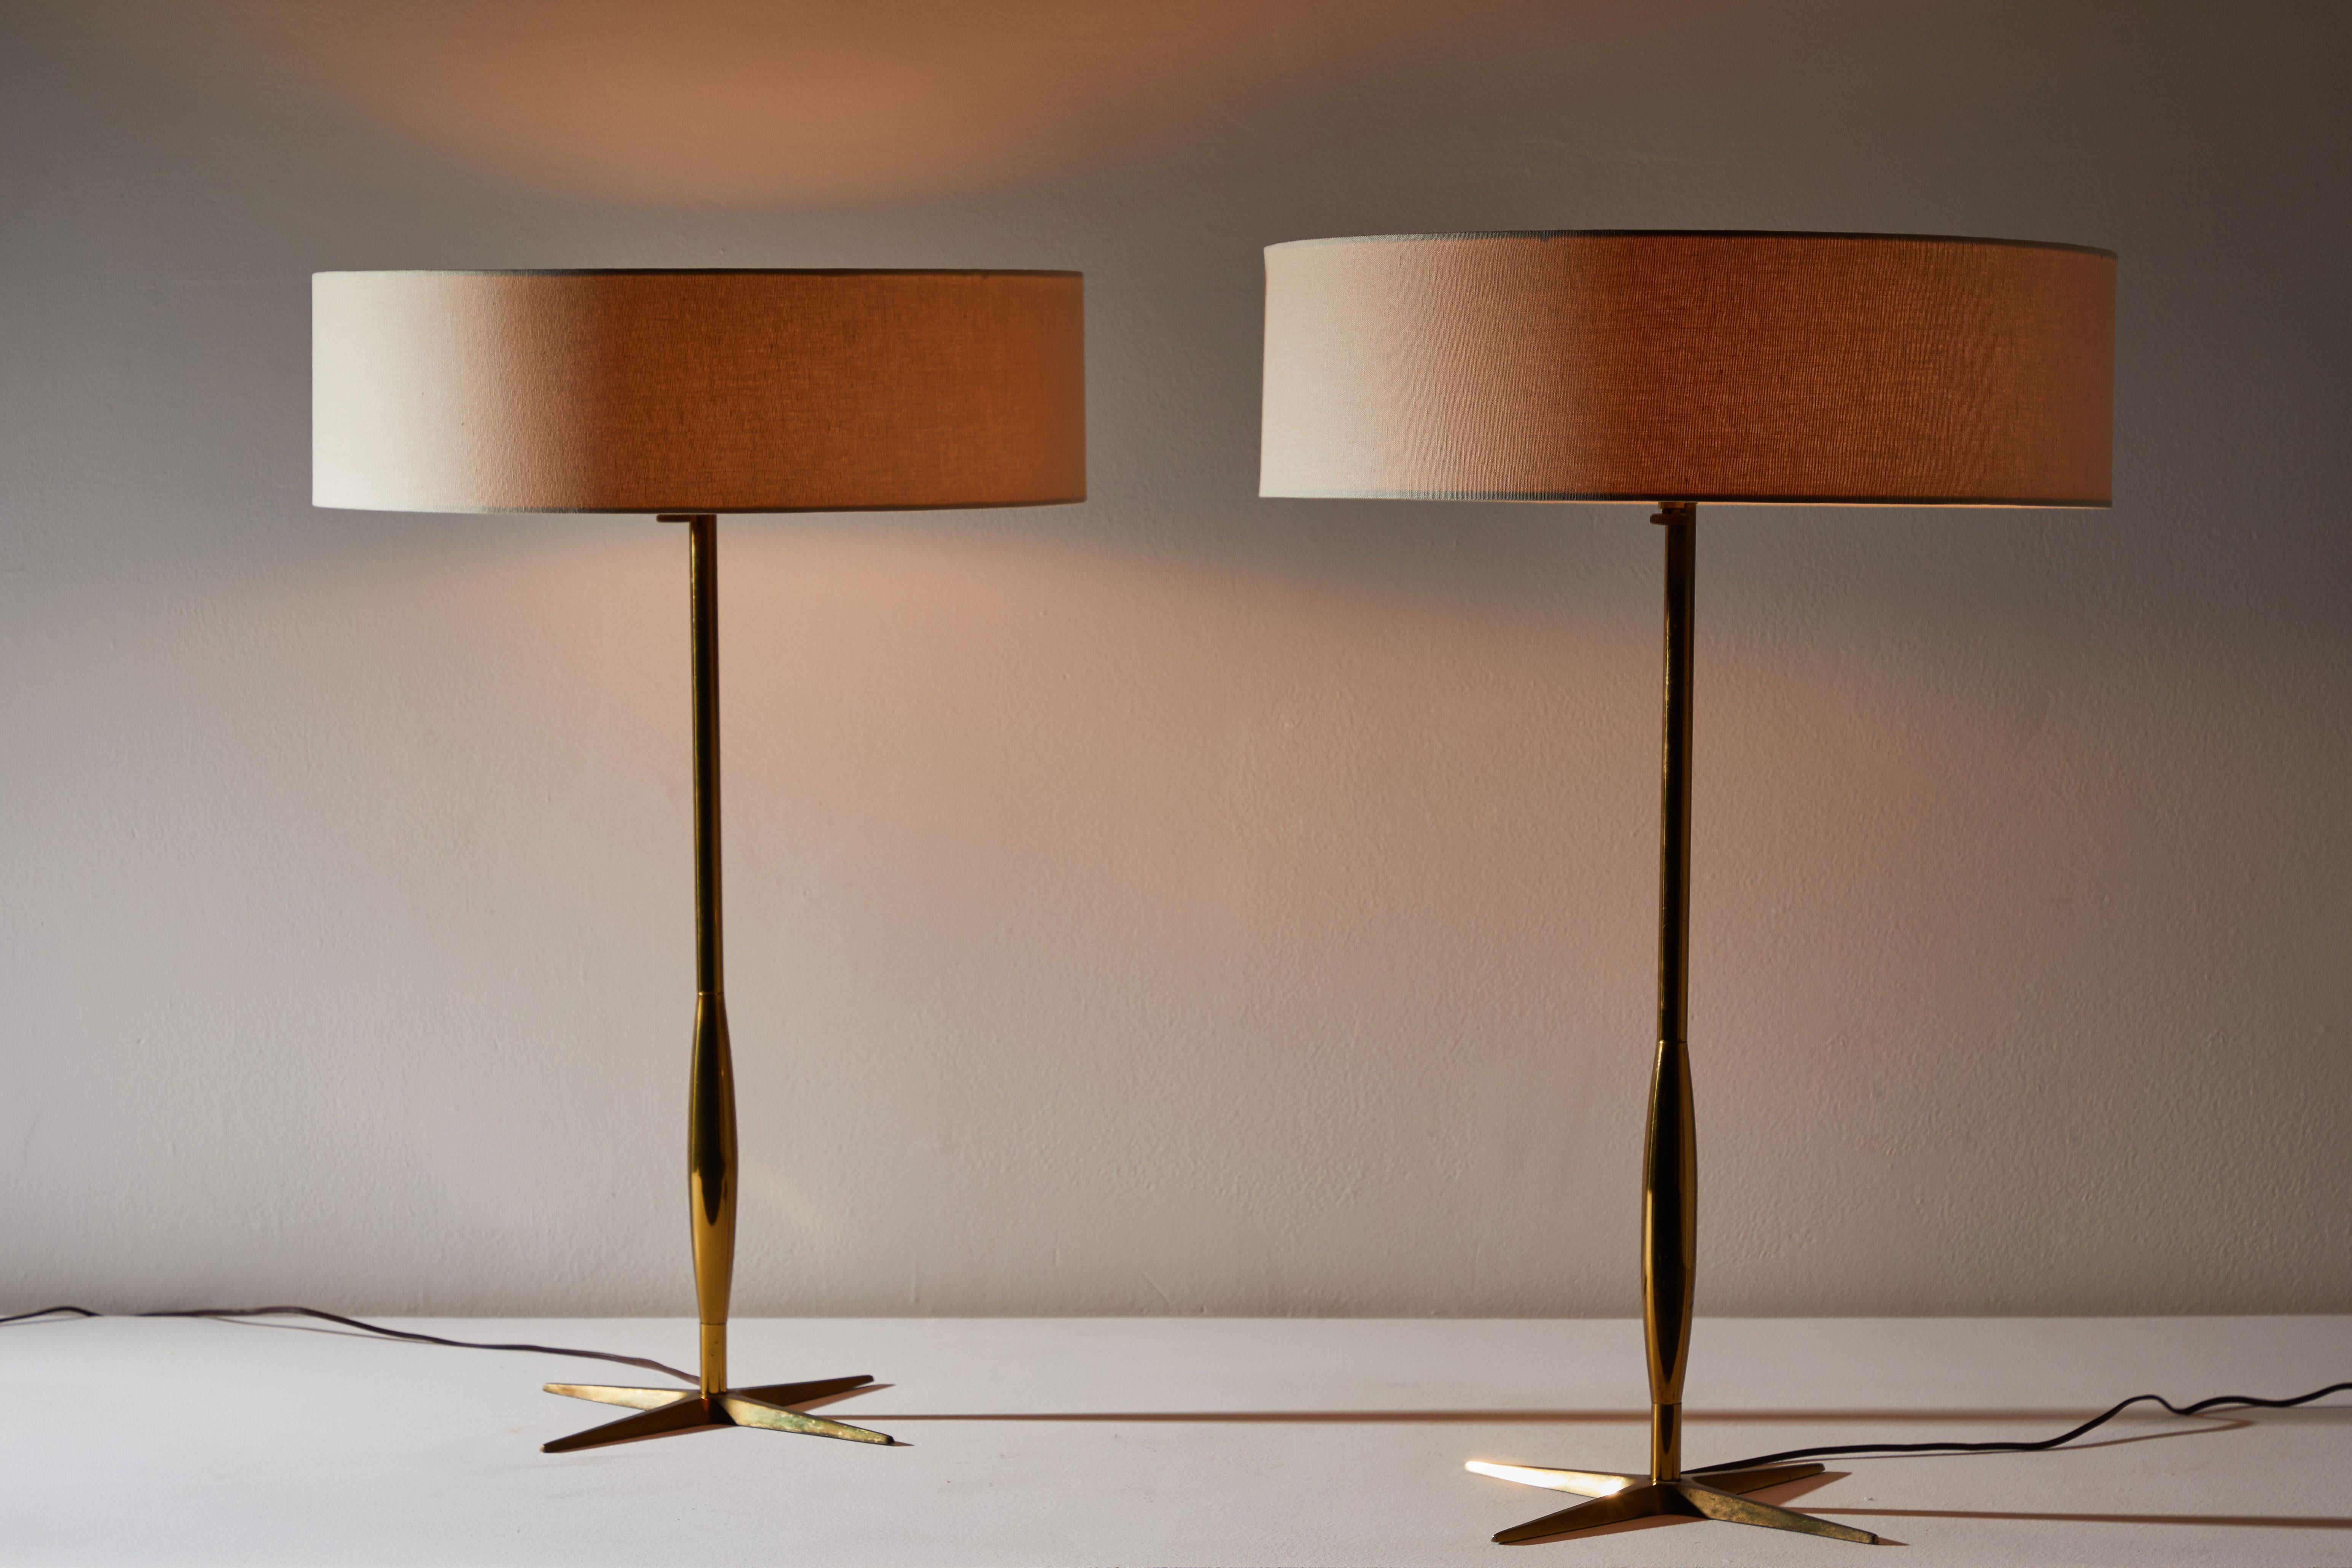 Pair of table lamps by Stiffel. Manufactured in the USA, circa 1950s. Brass base and stems. Custom linen shades. Original cords. Each light takes three E26 25W maximum bulbs.
   